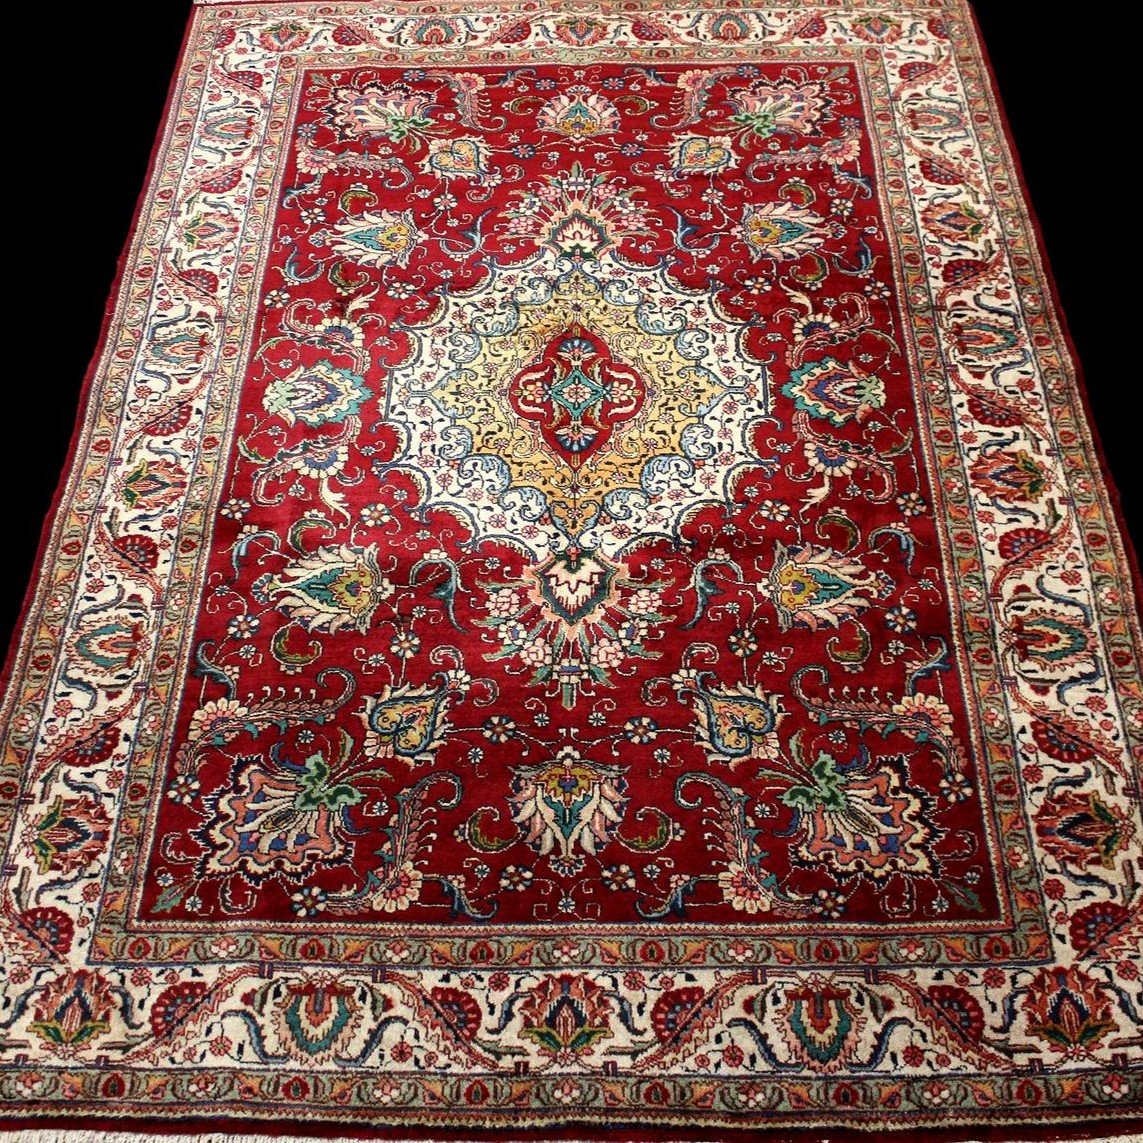 Tabriz Rug, 205 Cm X 310 Cm, Hand-knotted Kork Wool Circa 1970-1980, In Perfect Condition